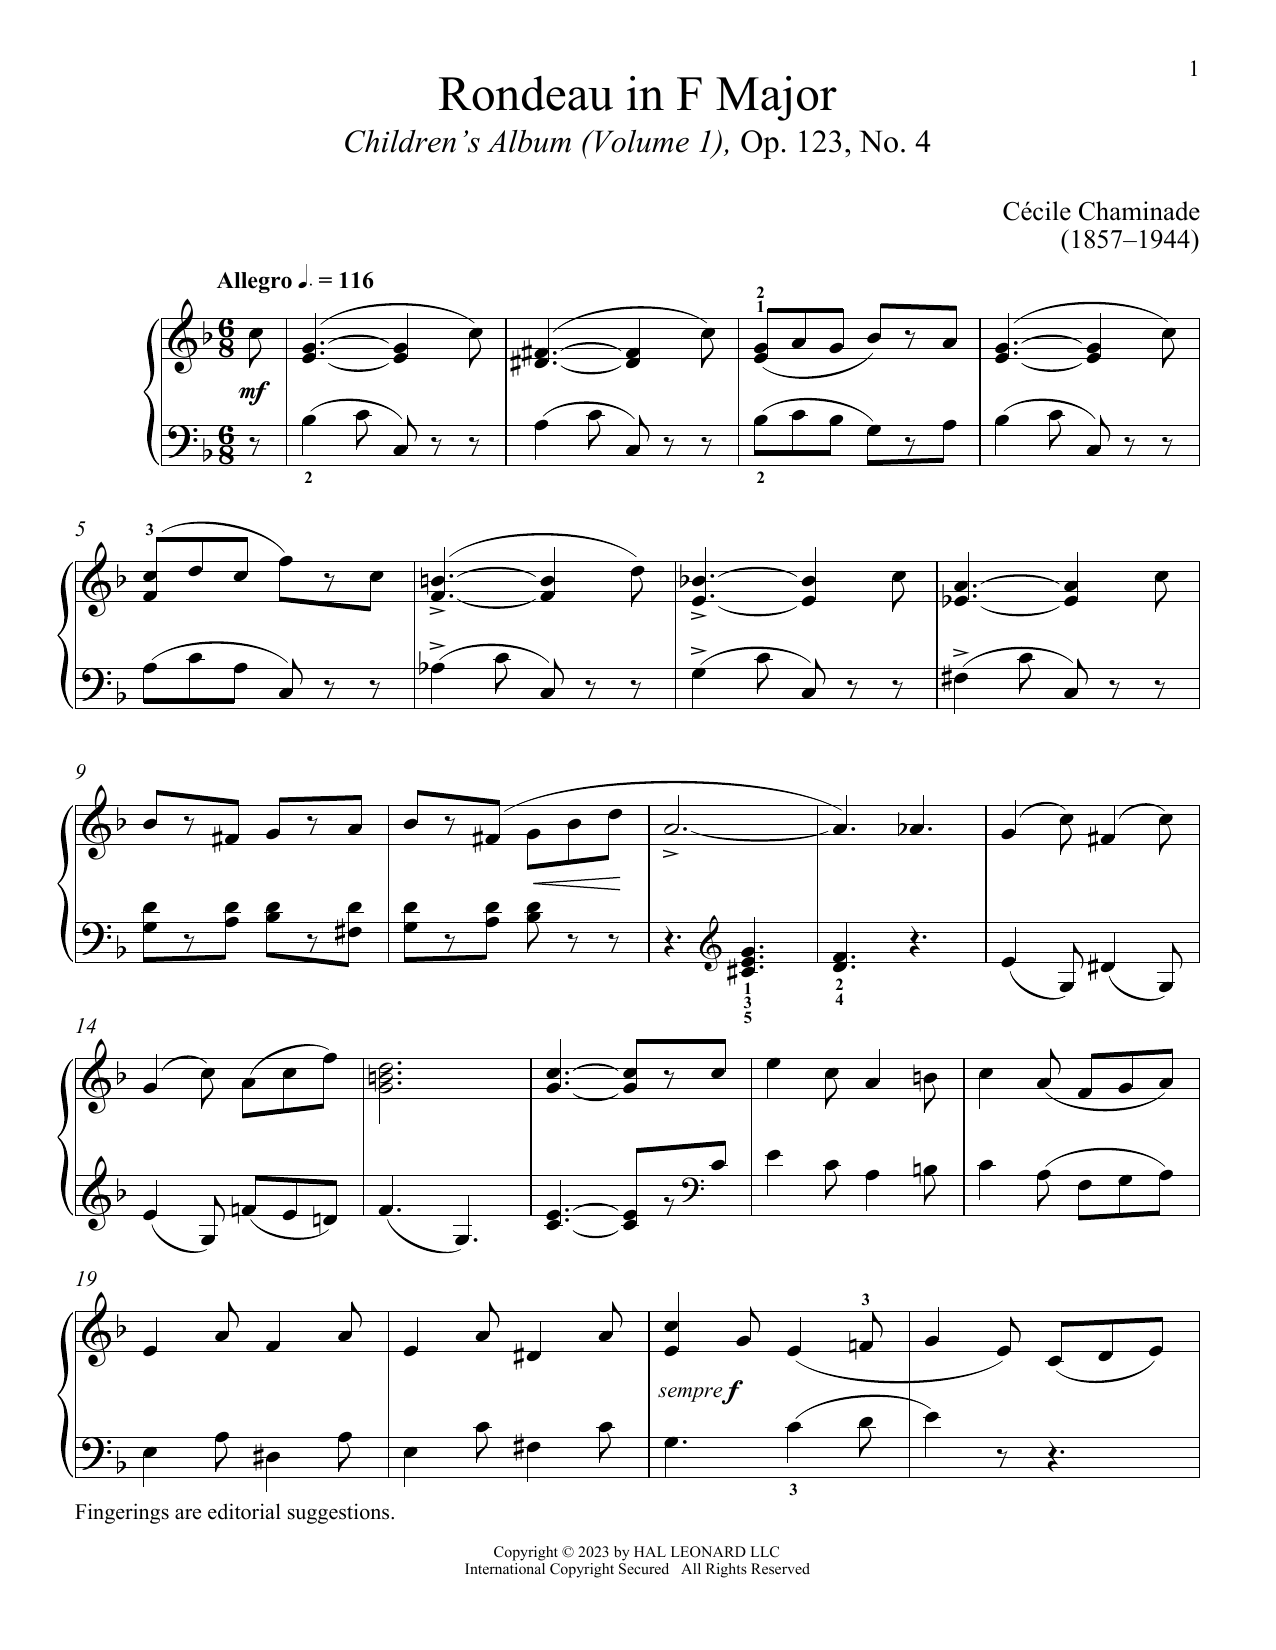 Download Cecile Chaminade Rondeau Sheet Music